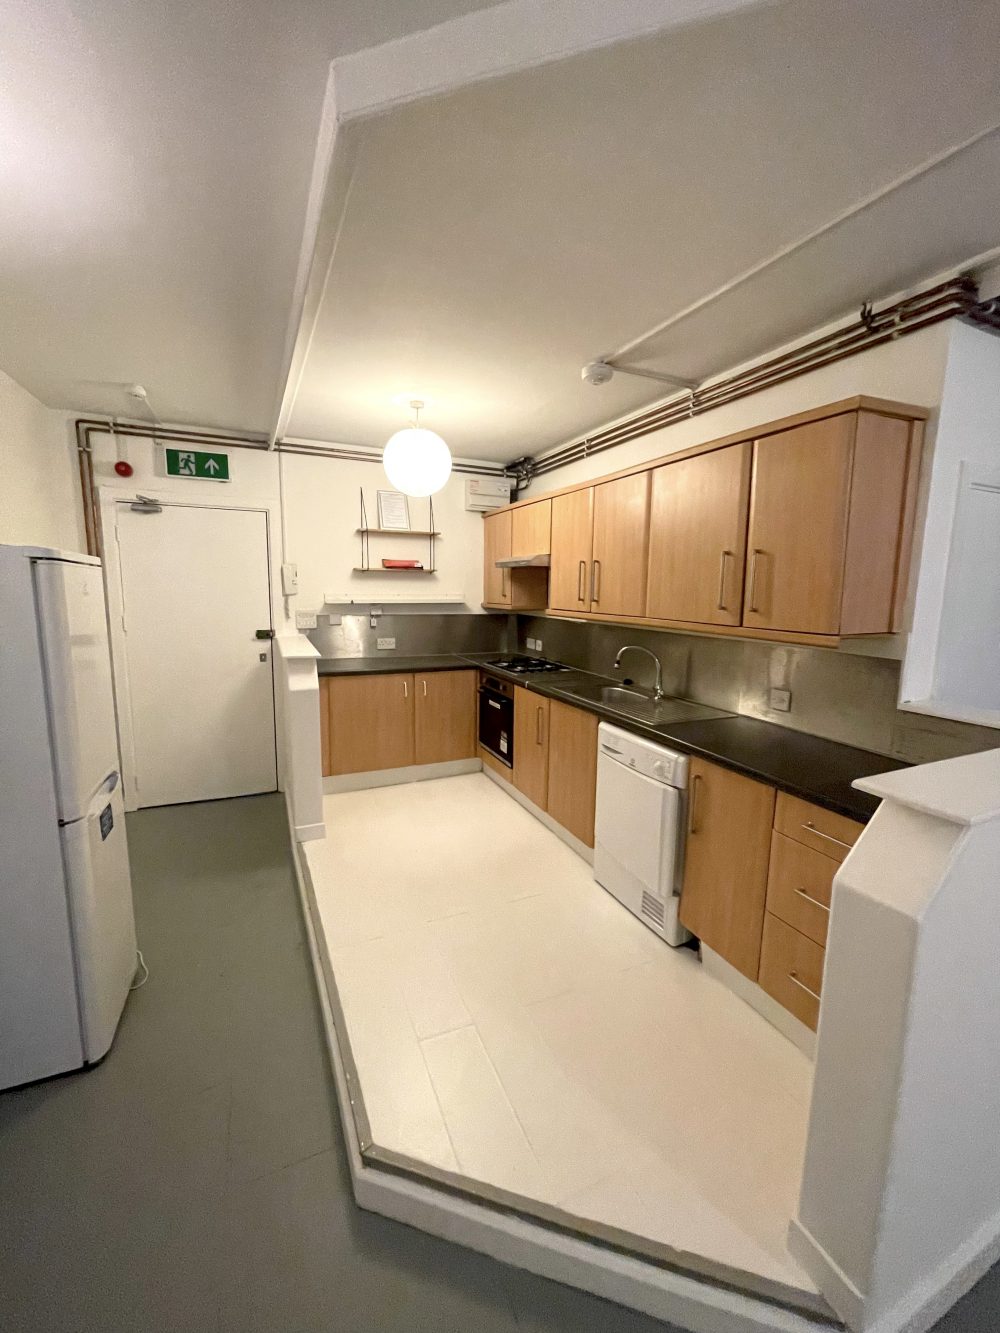 2 Bedroom Flat Available to rent in E9 London Fields Enterprise House Pic43